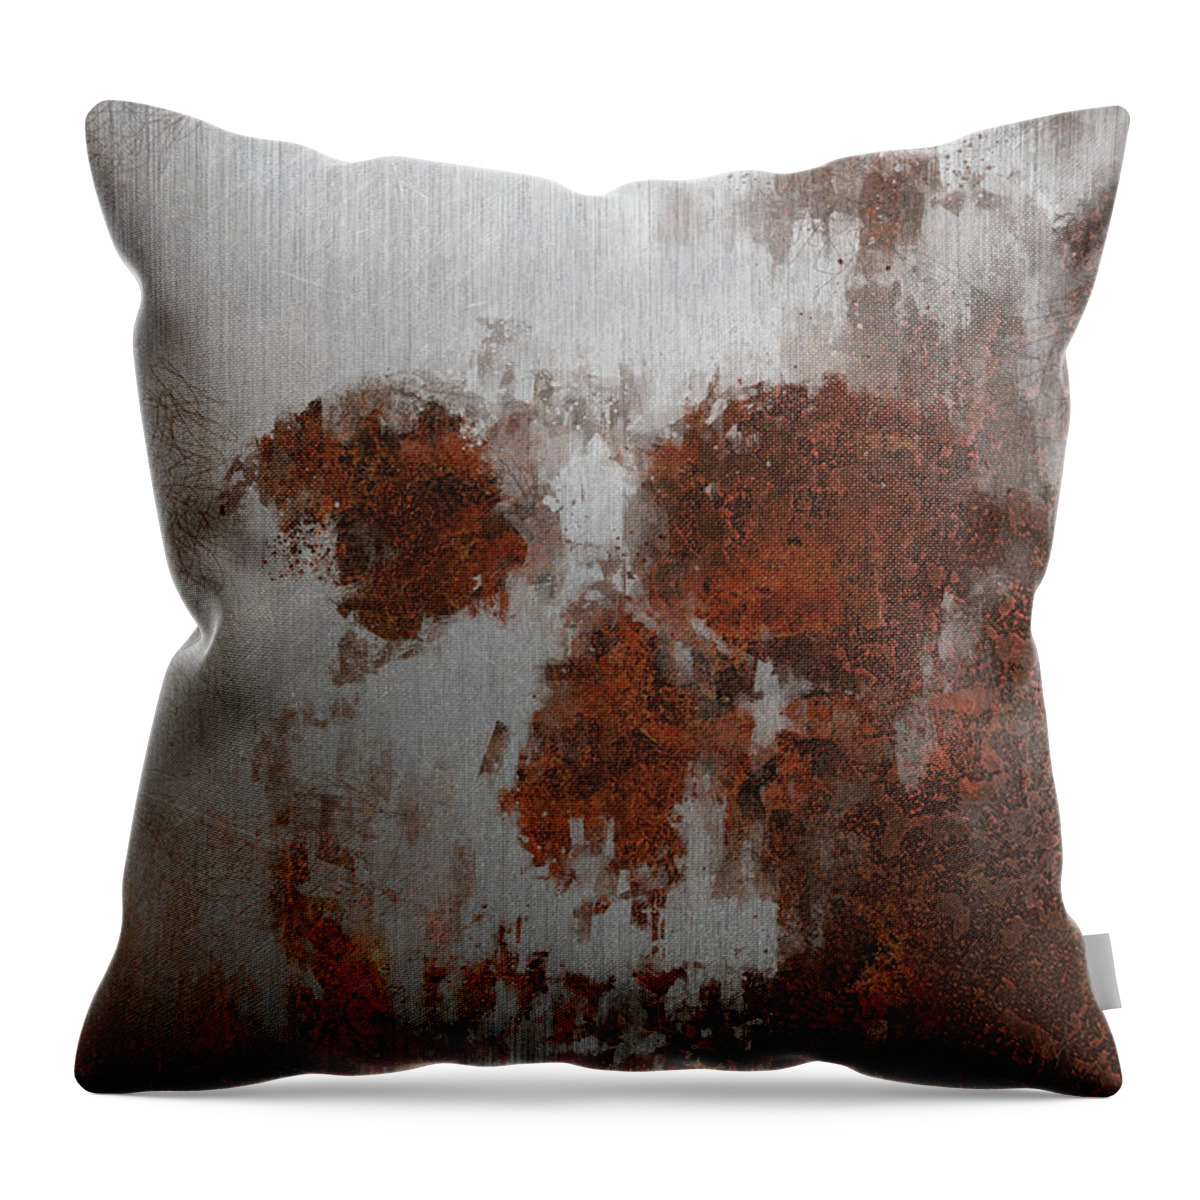 Rust Throw Pillow featuring the mixed media Rust Skull by Vart Studio